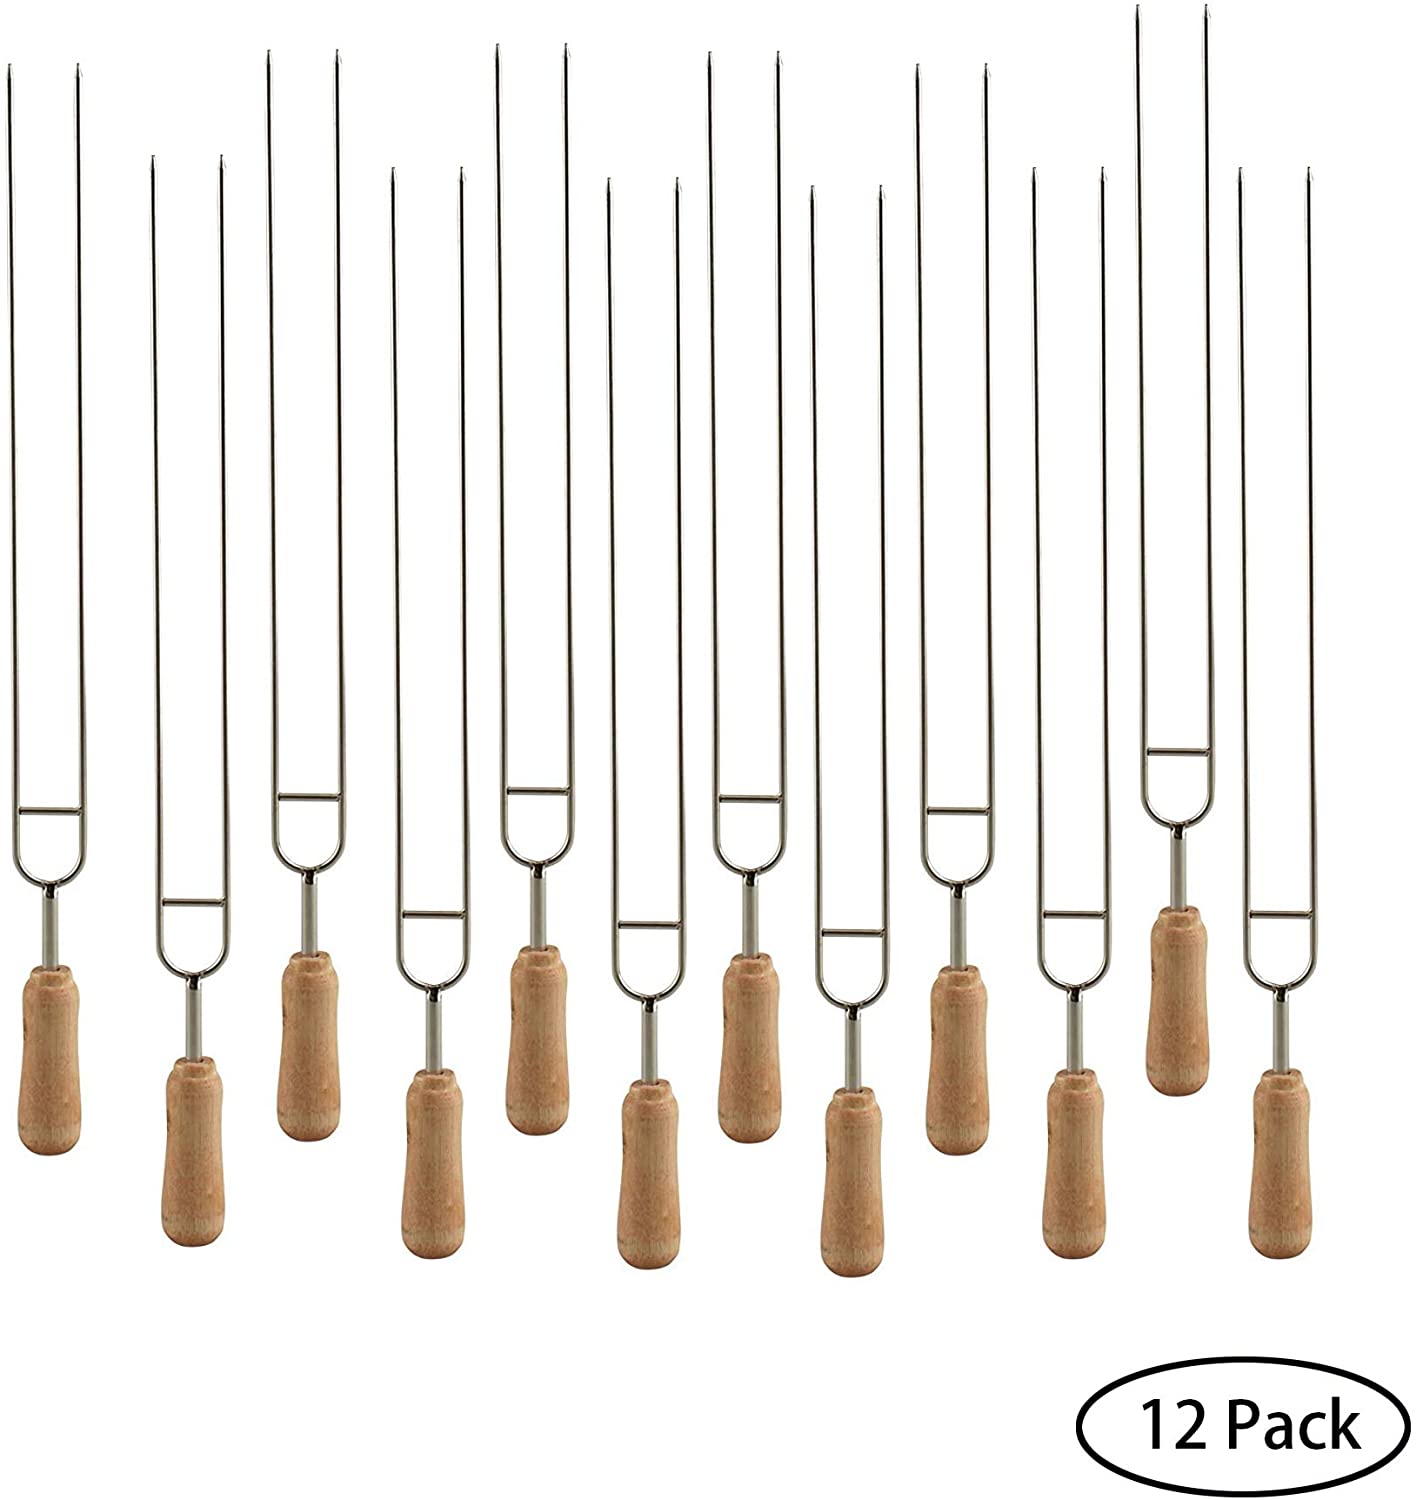 12-Pieces Double Prongs BBQ Barbecue Shish Kebab Skewers Stainless Steel Wooden Handle 15 inch